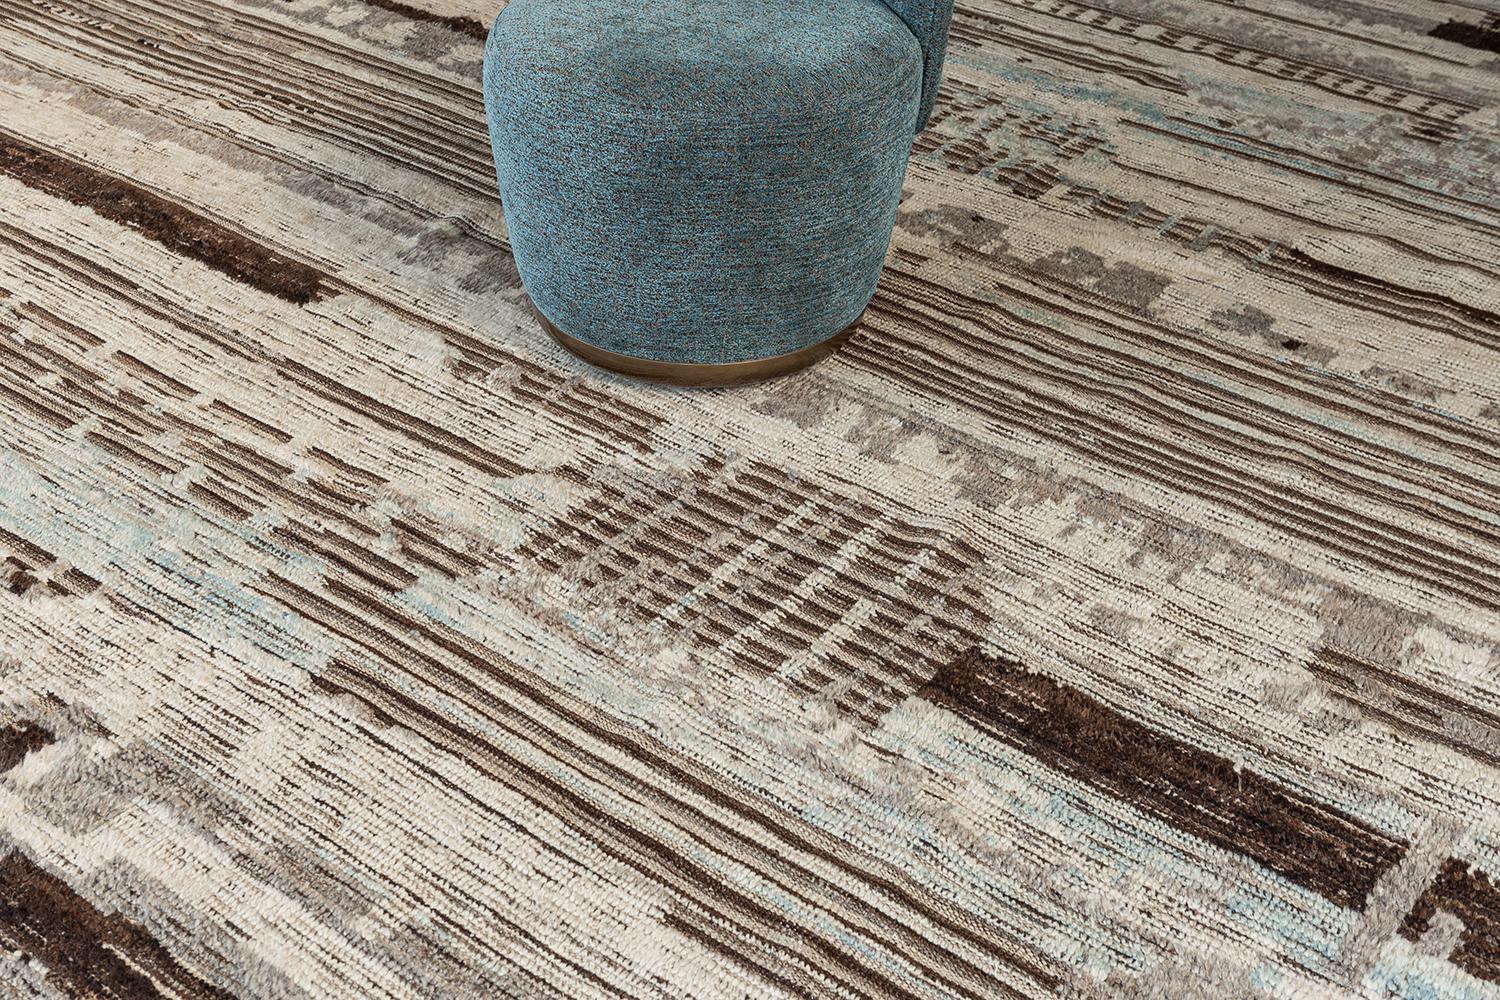 Malaren is a luxurious wool rug with timeless embossed detailing. In addition to its perfect natural flat weave, Malaren has earthy tone shags that brings a lustrous texture and contemporary feel to one's space. With its plush pile, functional